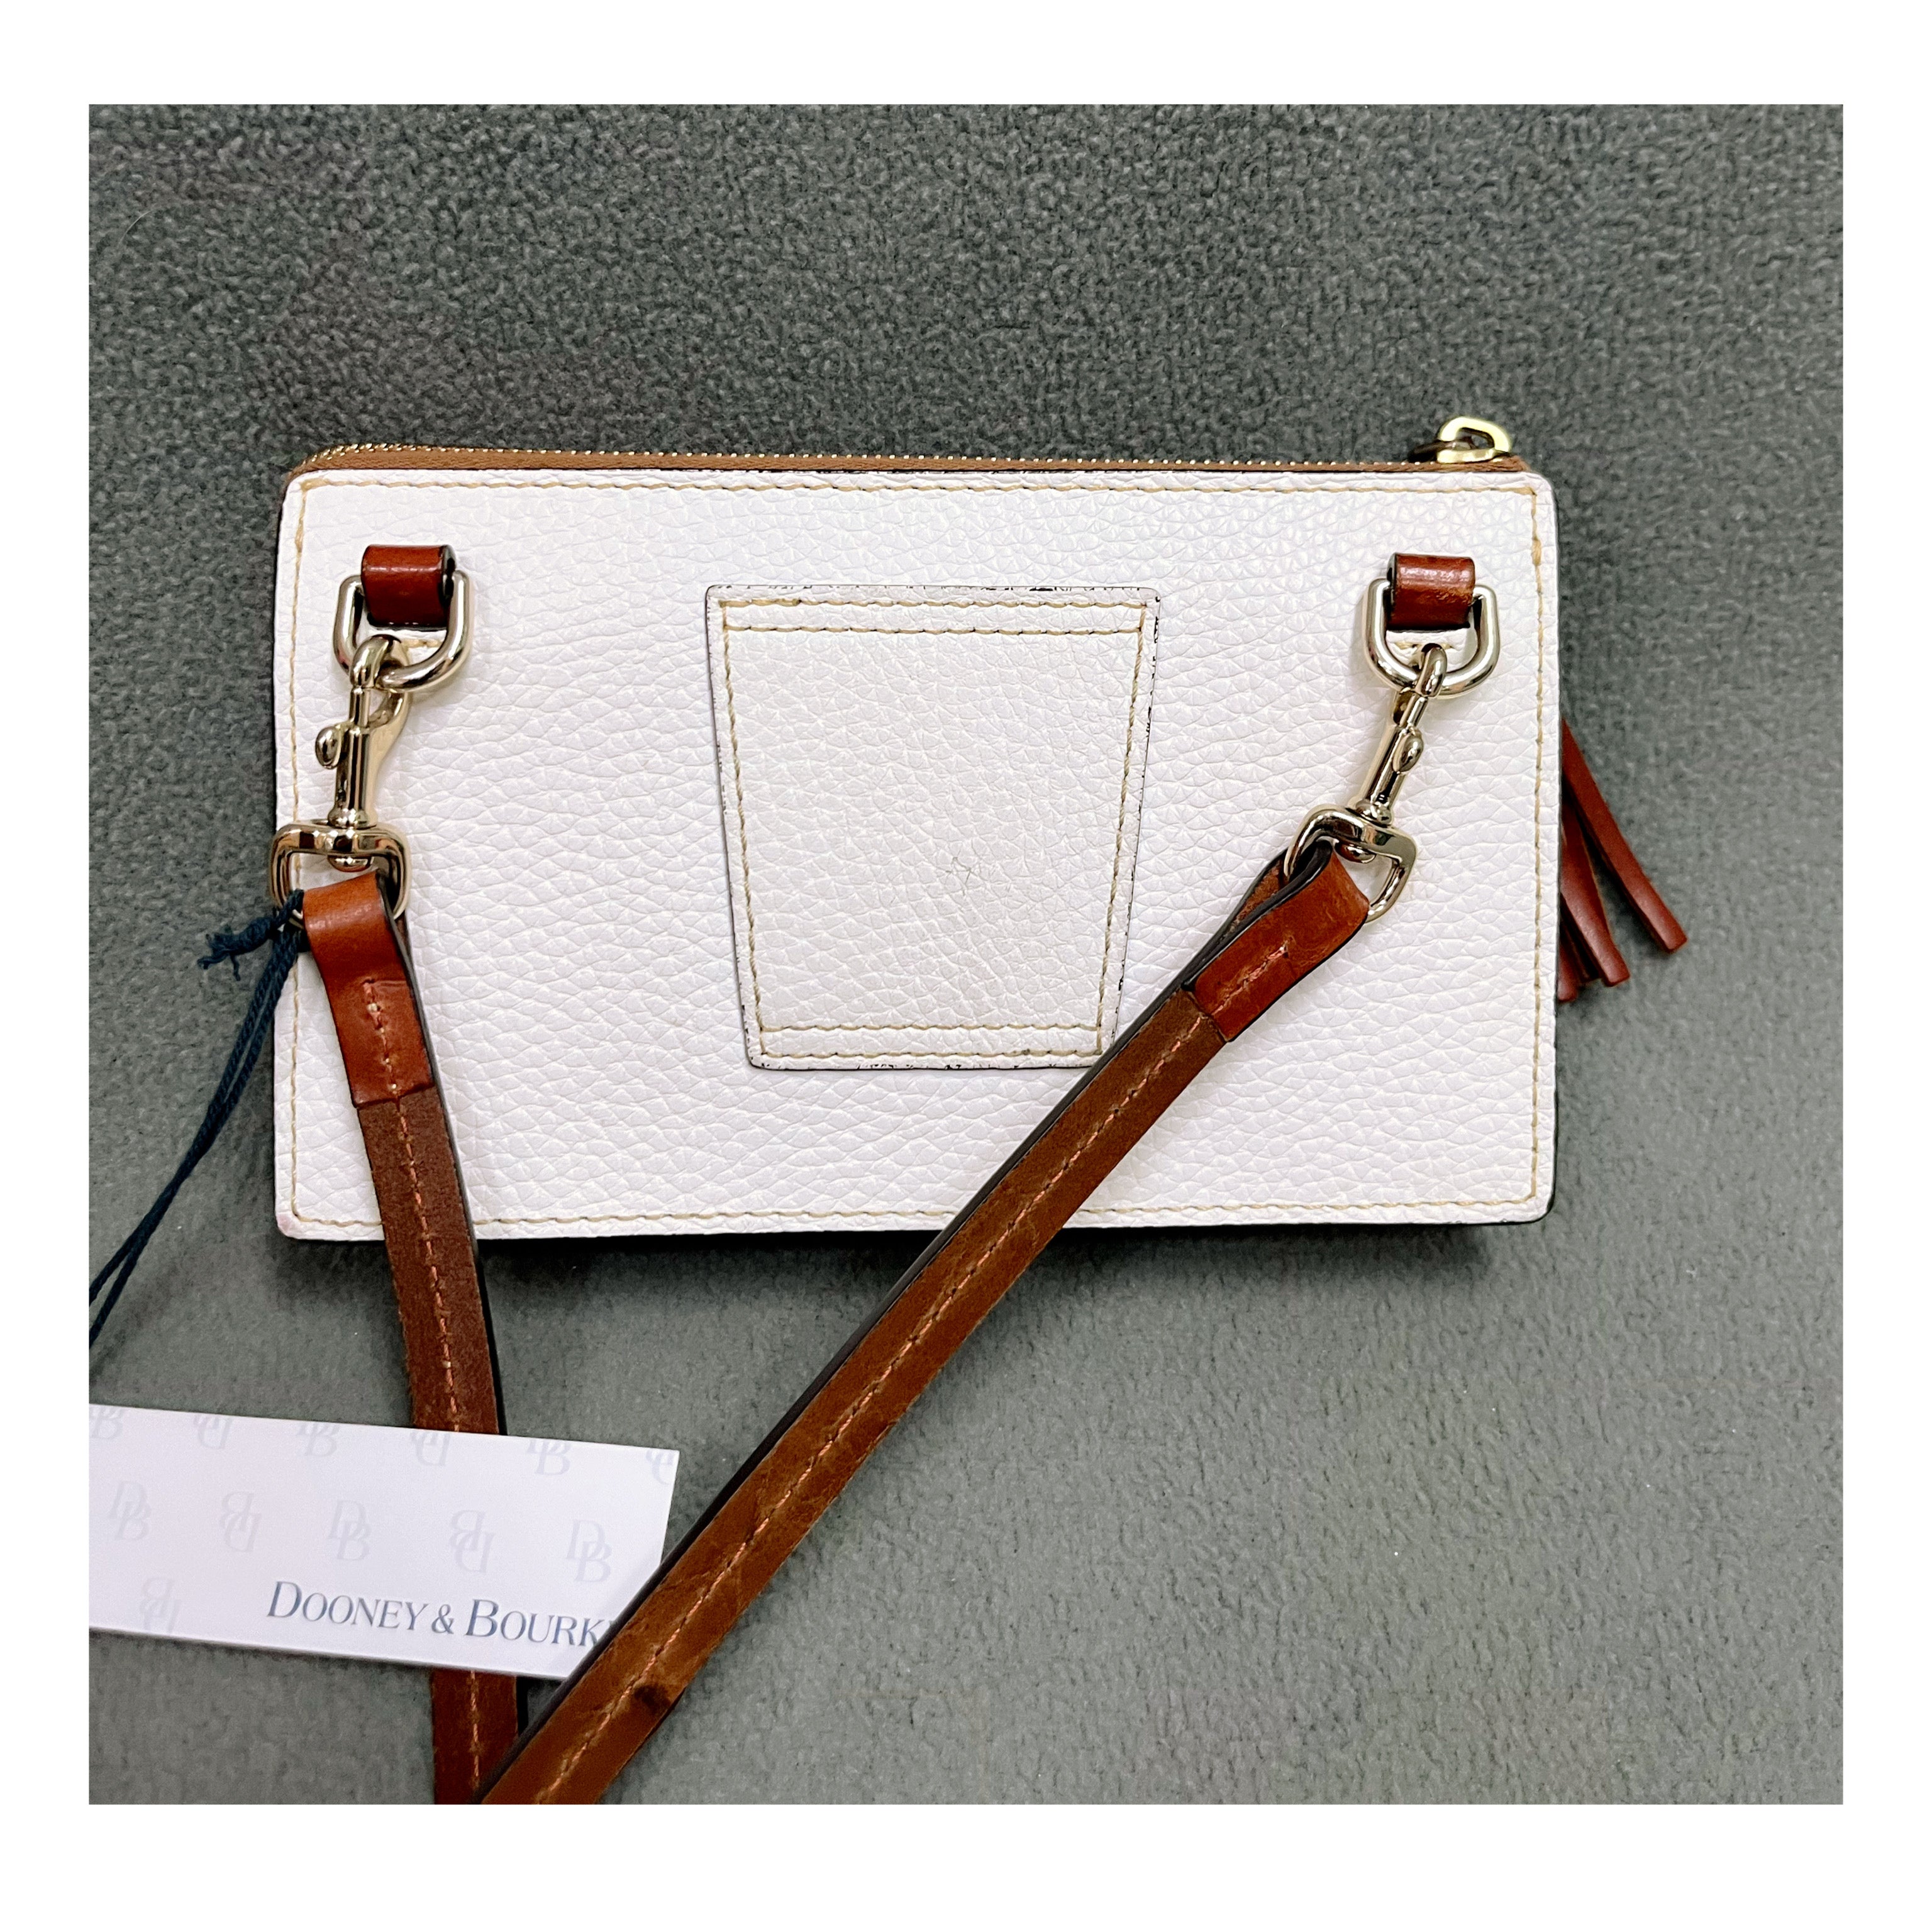 Dooney & Bourke bone Gingy crossbody bag, NEW WITH TAGS!